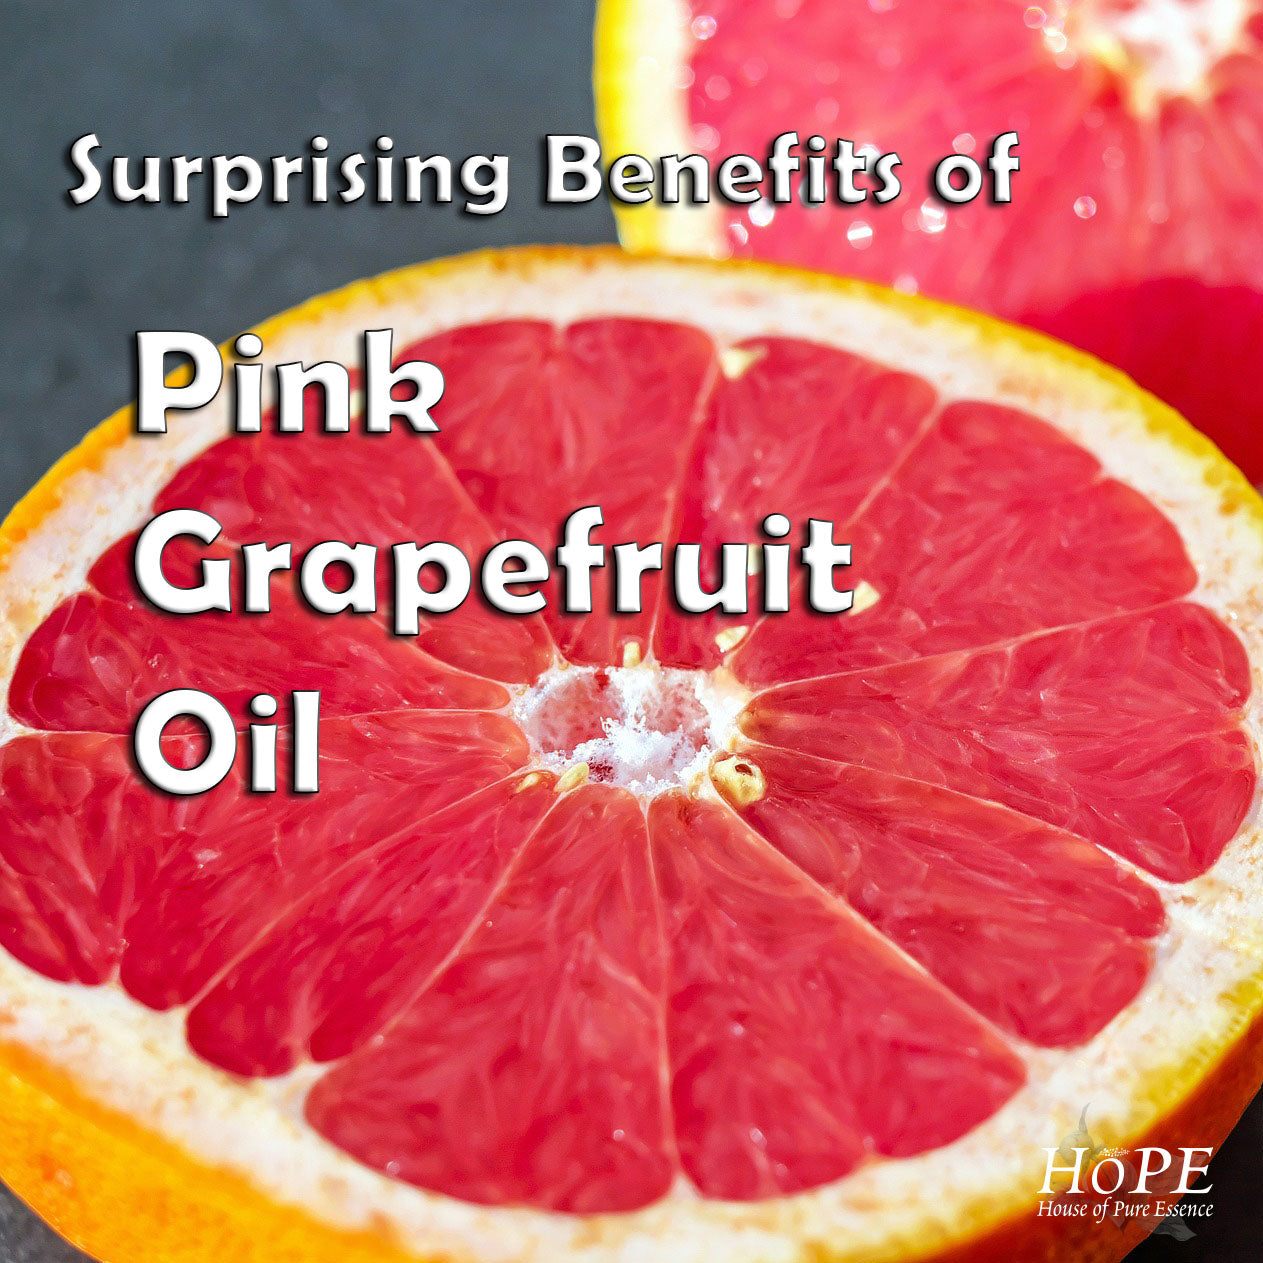 Surprising benefits of Pink Grapefruit Oil - House of Pure Essence (HoPE)